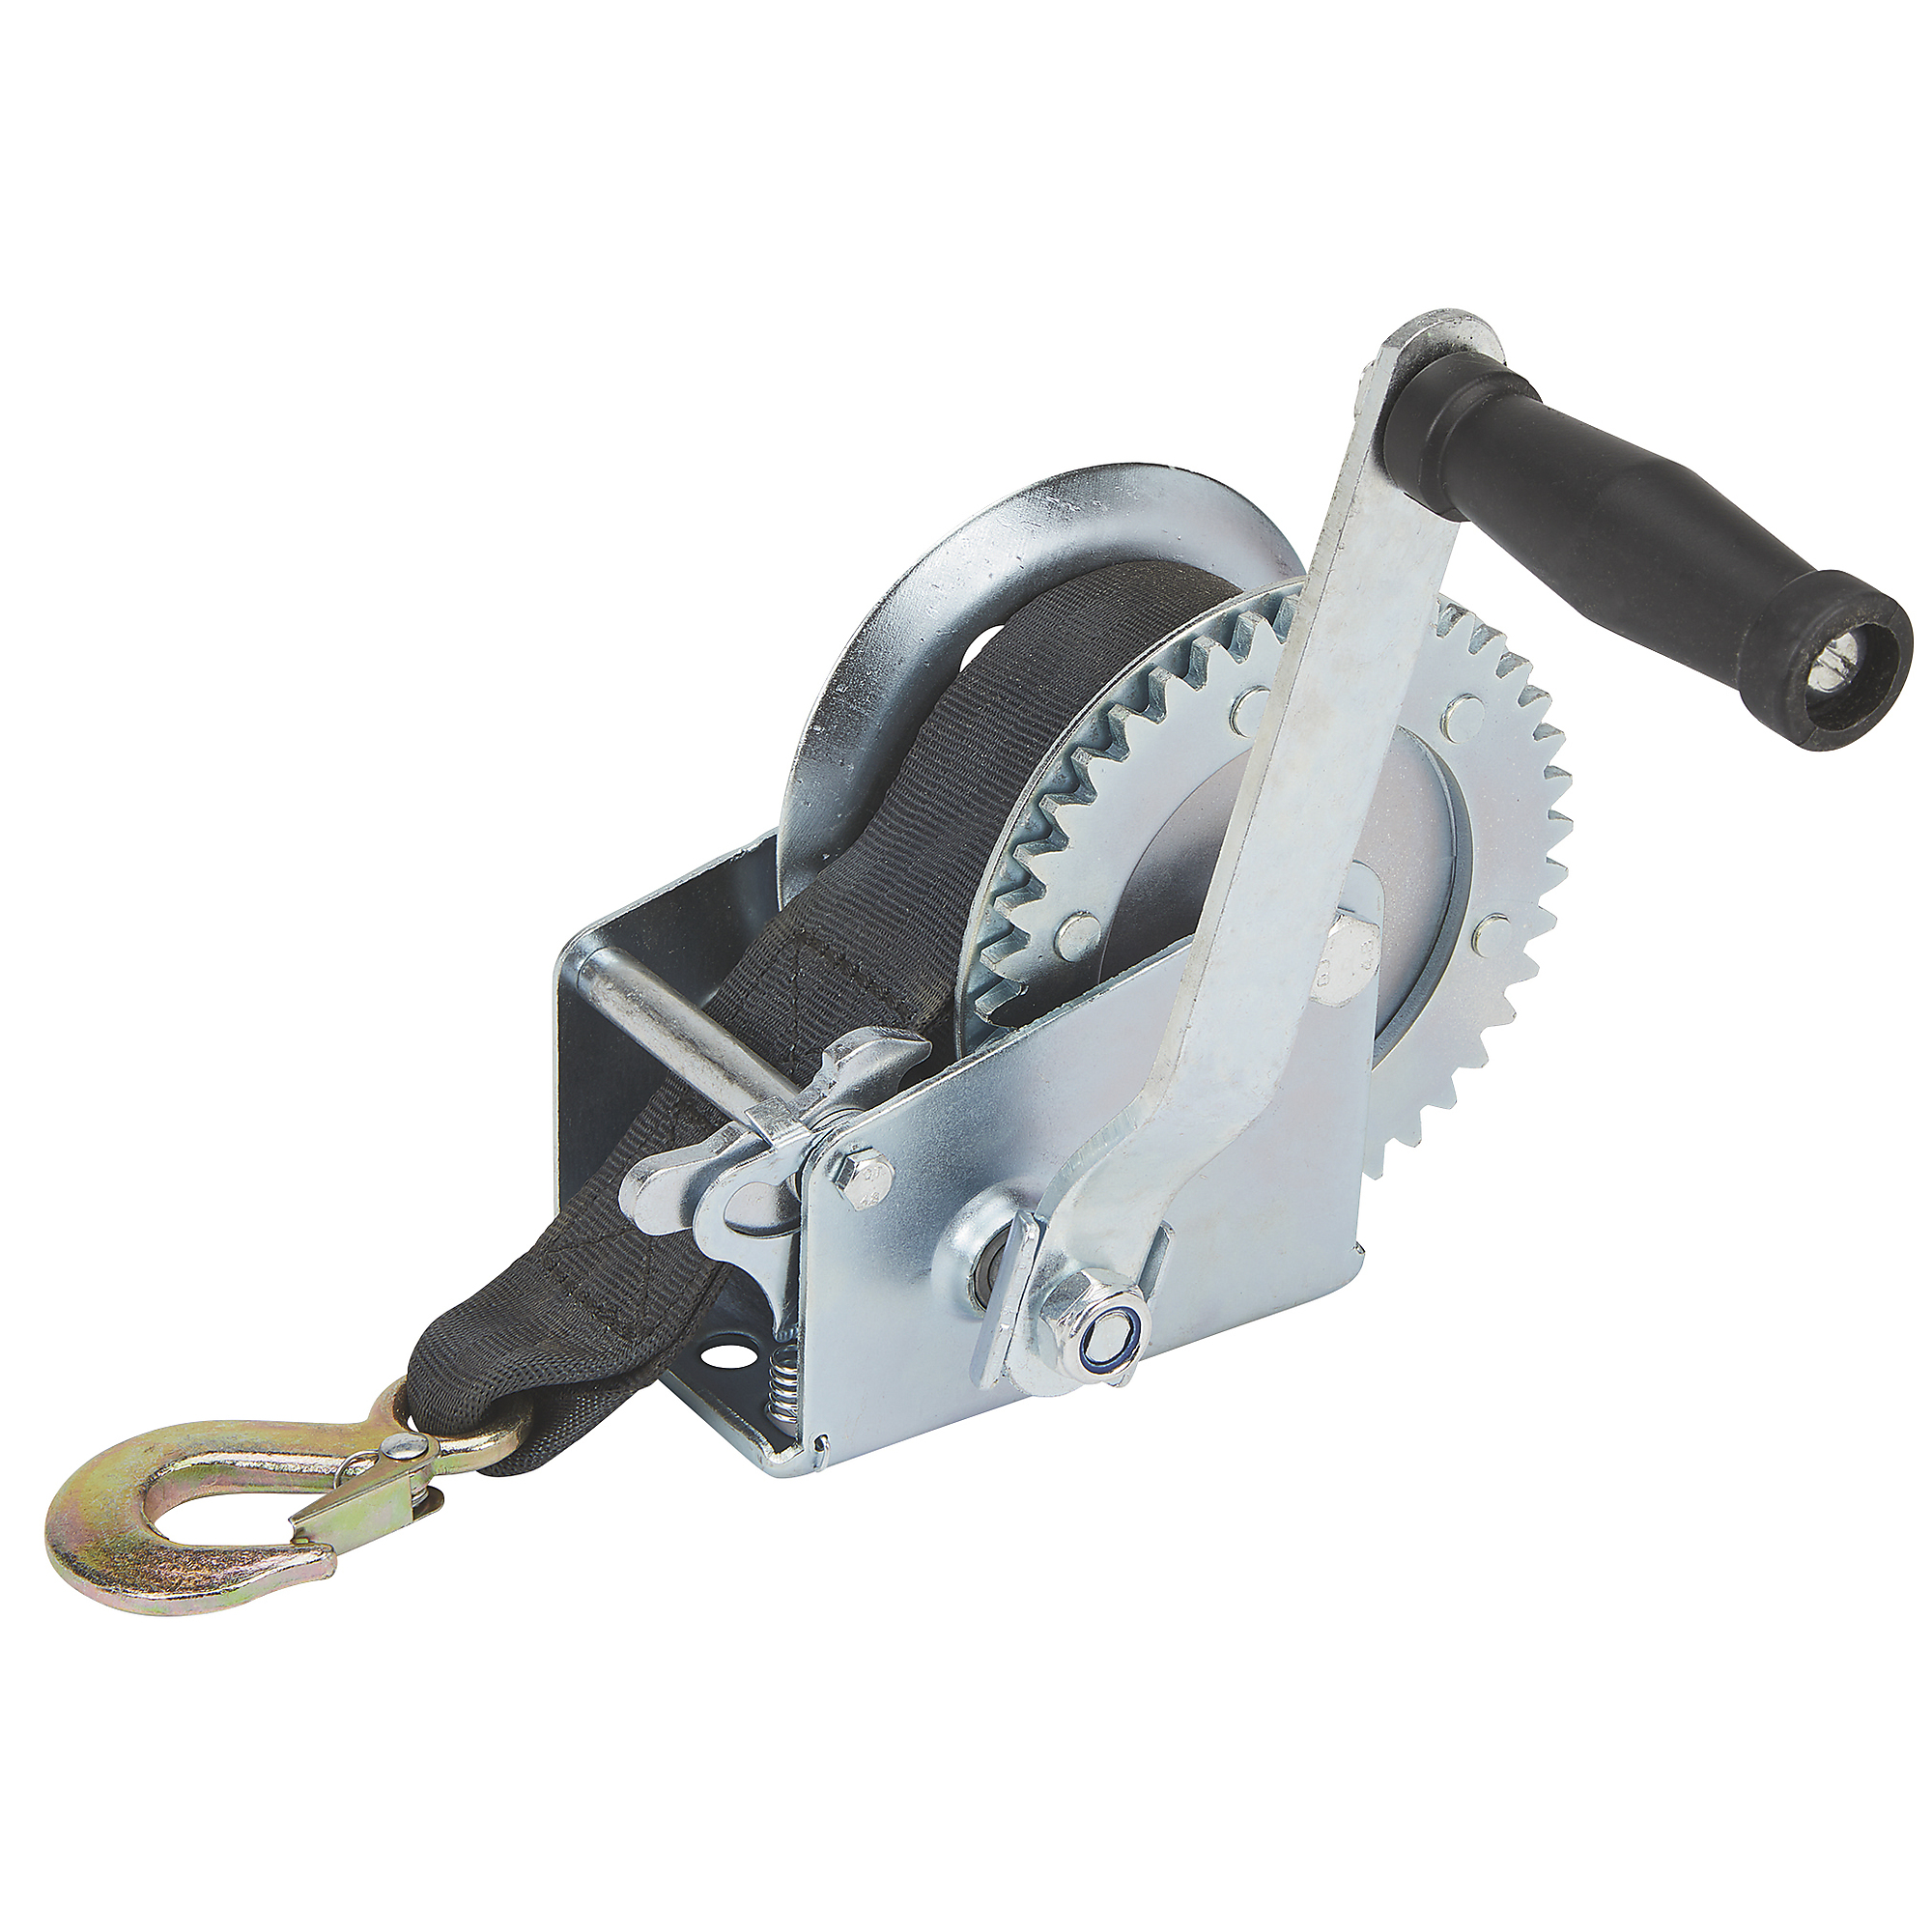 Ultra-Tow Single-Speed Hand Winch with Strap, 1000-Lb. Load Capacity, Model KW1000